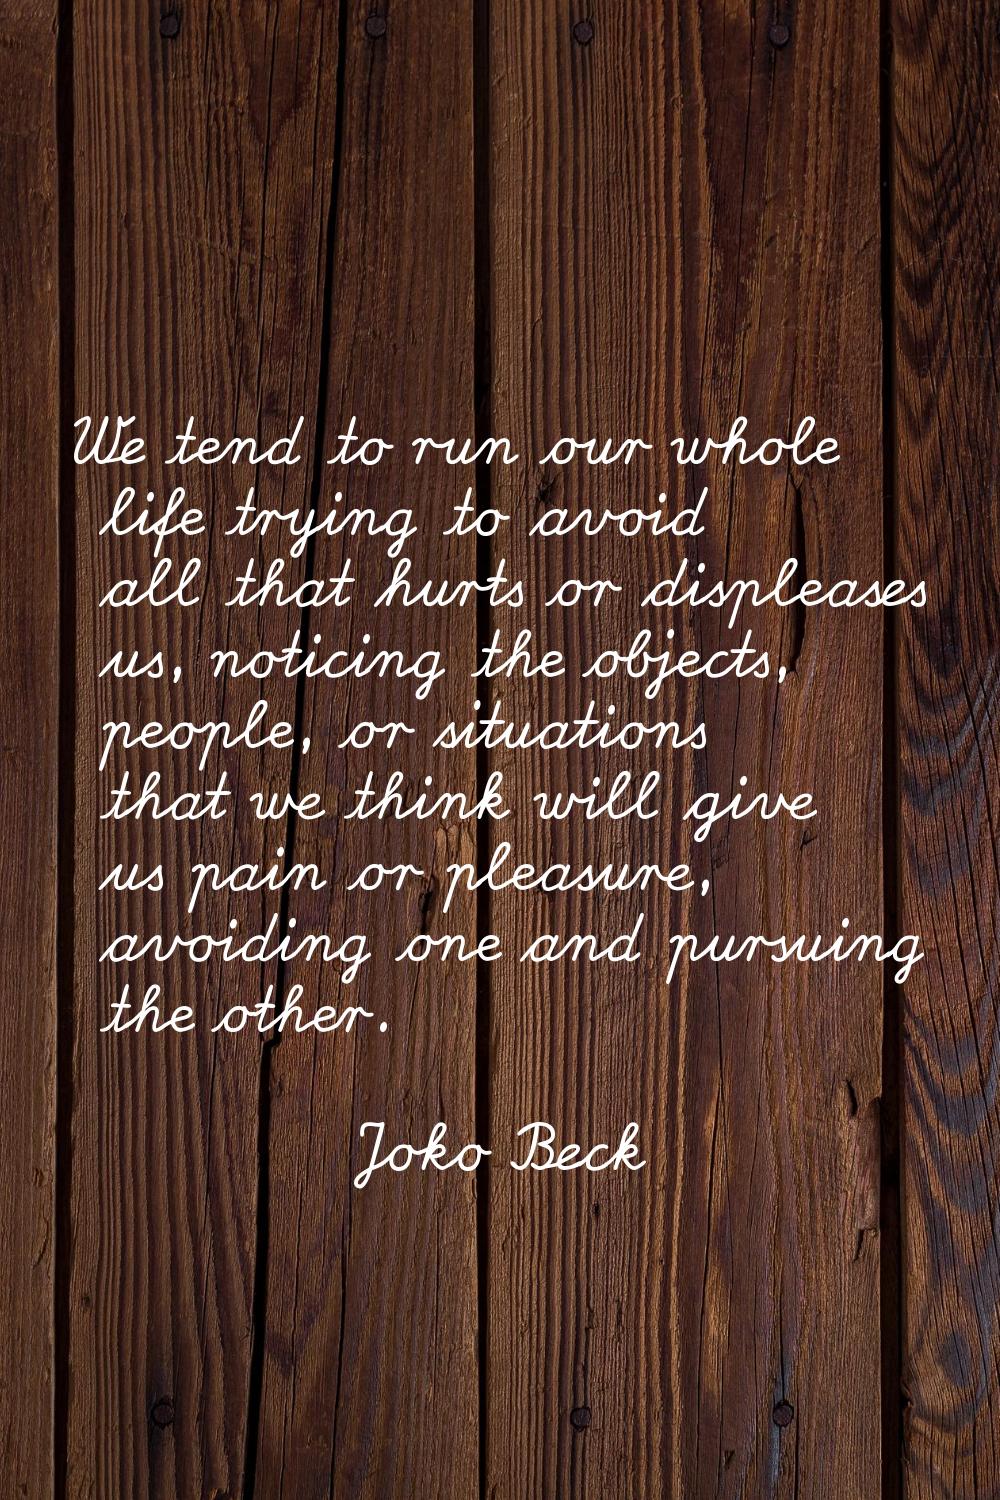 We tend to run our whole life trying to avoid all that hurts or displeases us, noticing the objects